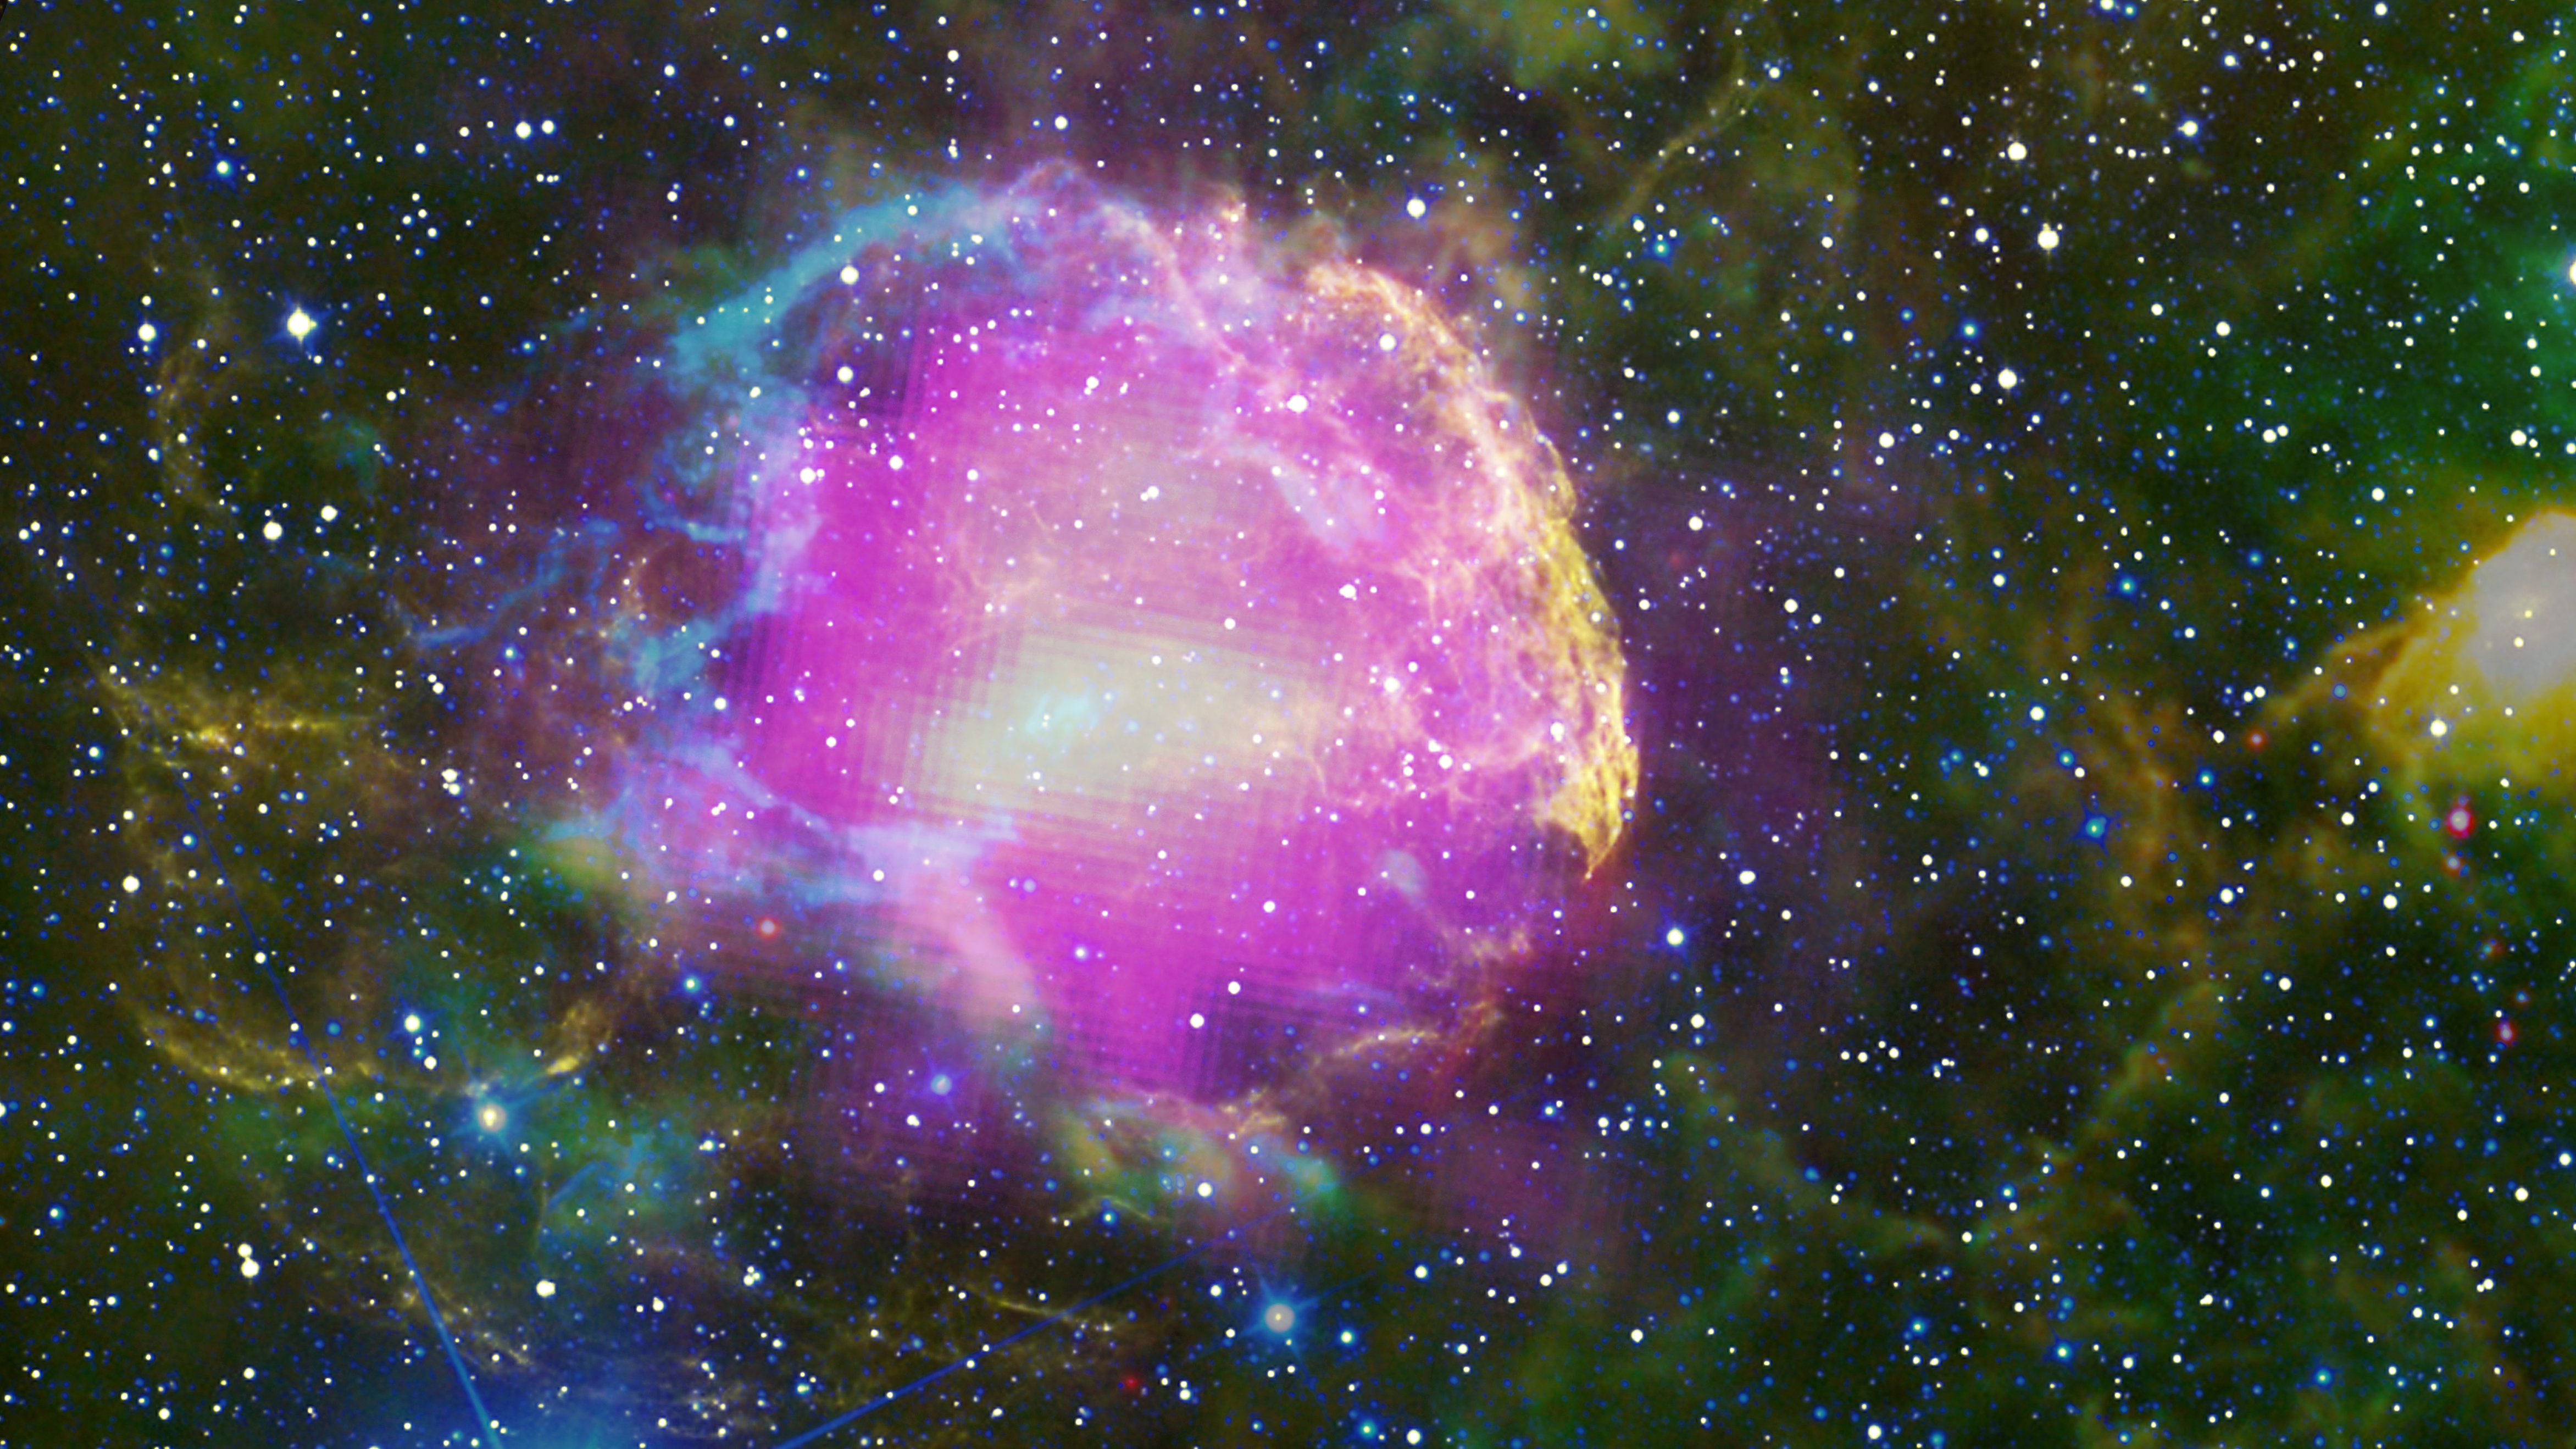 This multiwavelength composite shows the supernova remnant IC 443, also known as the Jellyfish Nebula. Fermi GeV gamma-ray emission is shown in magenta, optical wavelengths as yellow, and infrared data from NASA's Wide-field Infrared Survey Explorer (WISE) mission is shown as blue (3.4 microns), cyan (4.6 microns), green (12 microns) and red (22 microns). Cyan loops indicate where the remnant is interacting with a dense cloud of interstellar gas.Credit: NASA/DOE/Fermi LAT Collaboration, Tom Bash and John Fox/Adam Block/NOAO/AURA/NSF, JPL-Caltech/UCLA